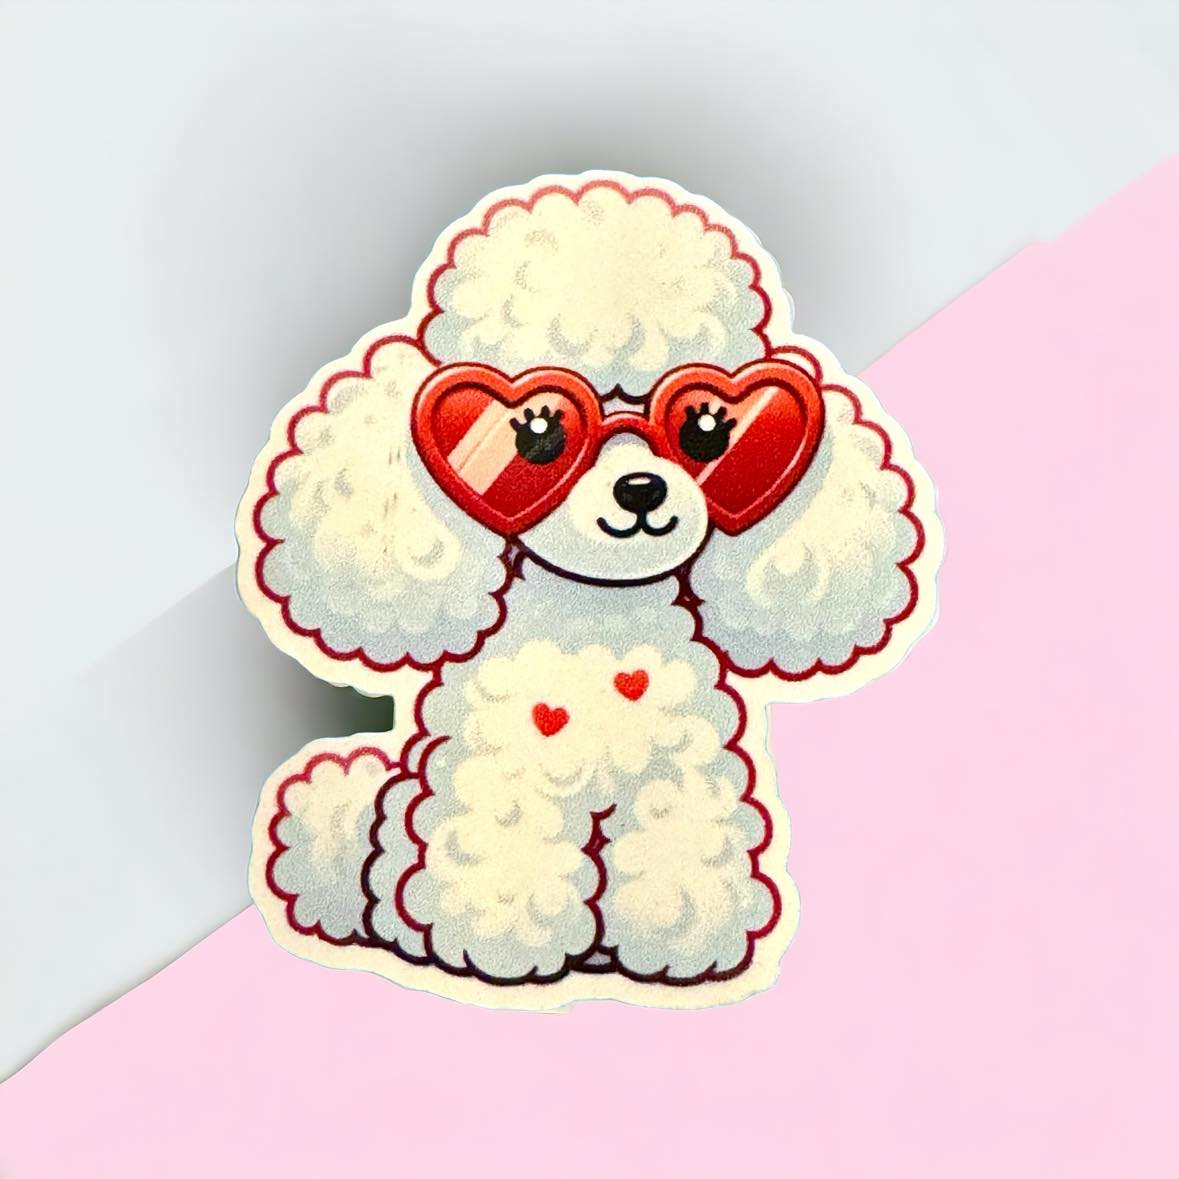 White Poodle with Heart Shaped Glasses Sticker - Love Glasses Revolution